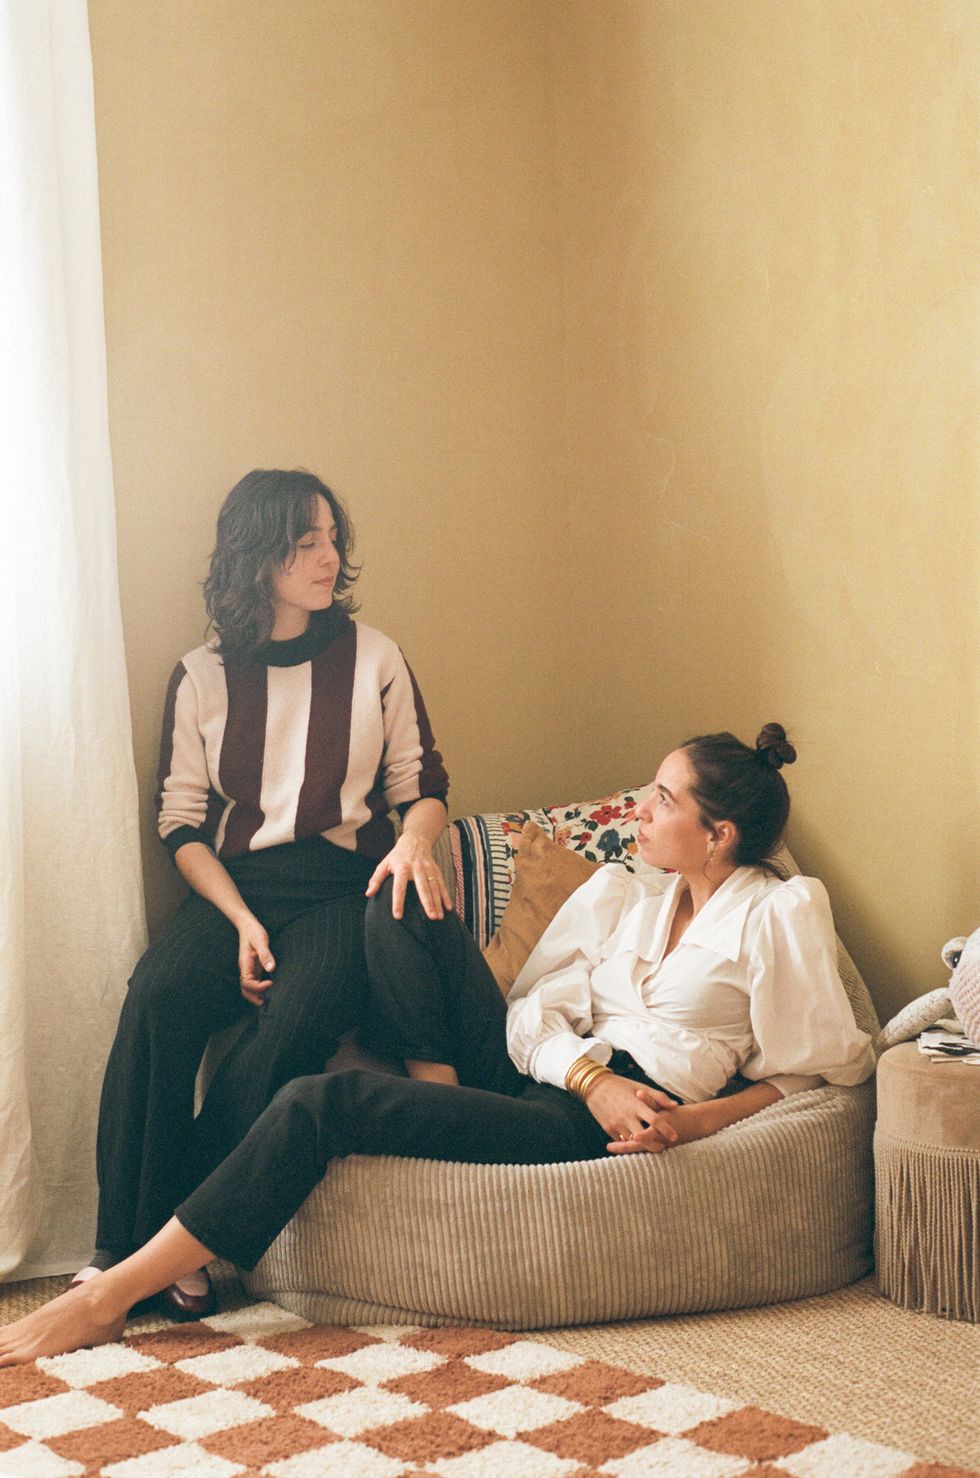 a person sitting on a couch with another woman sitting on the couch